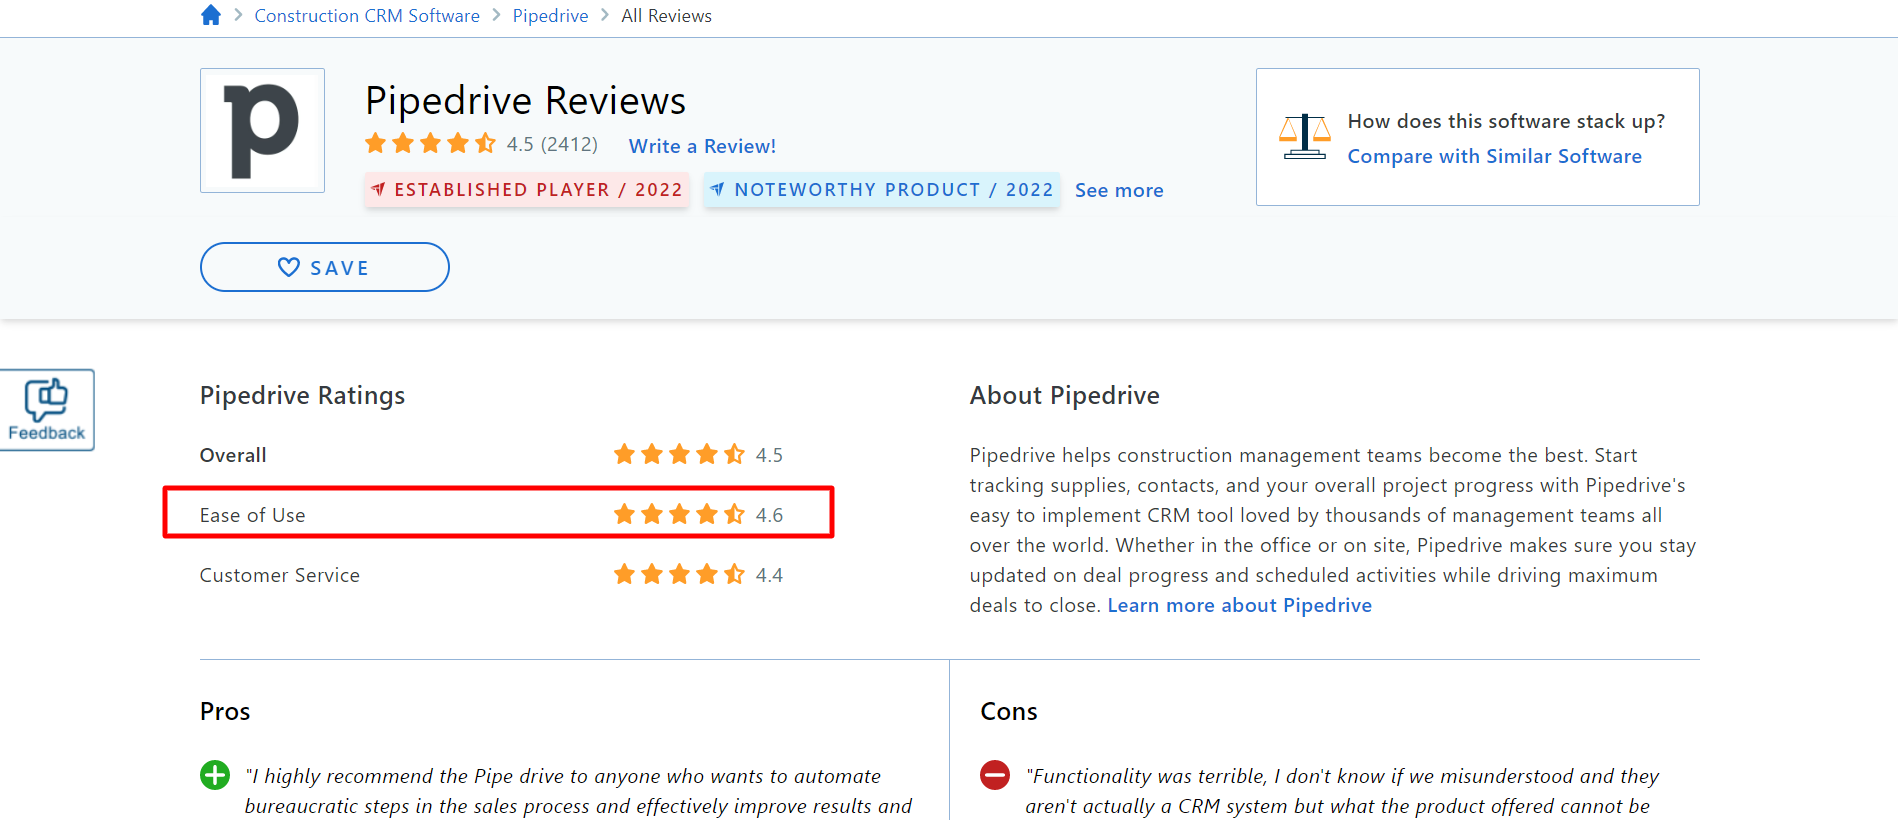 Pipedrive Reviews and ratings ease of use